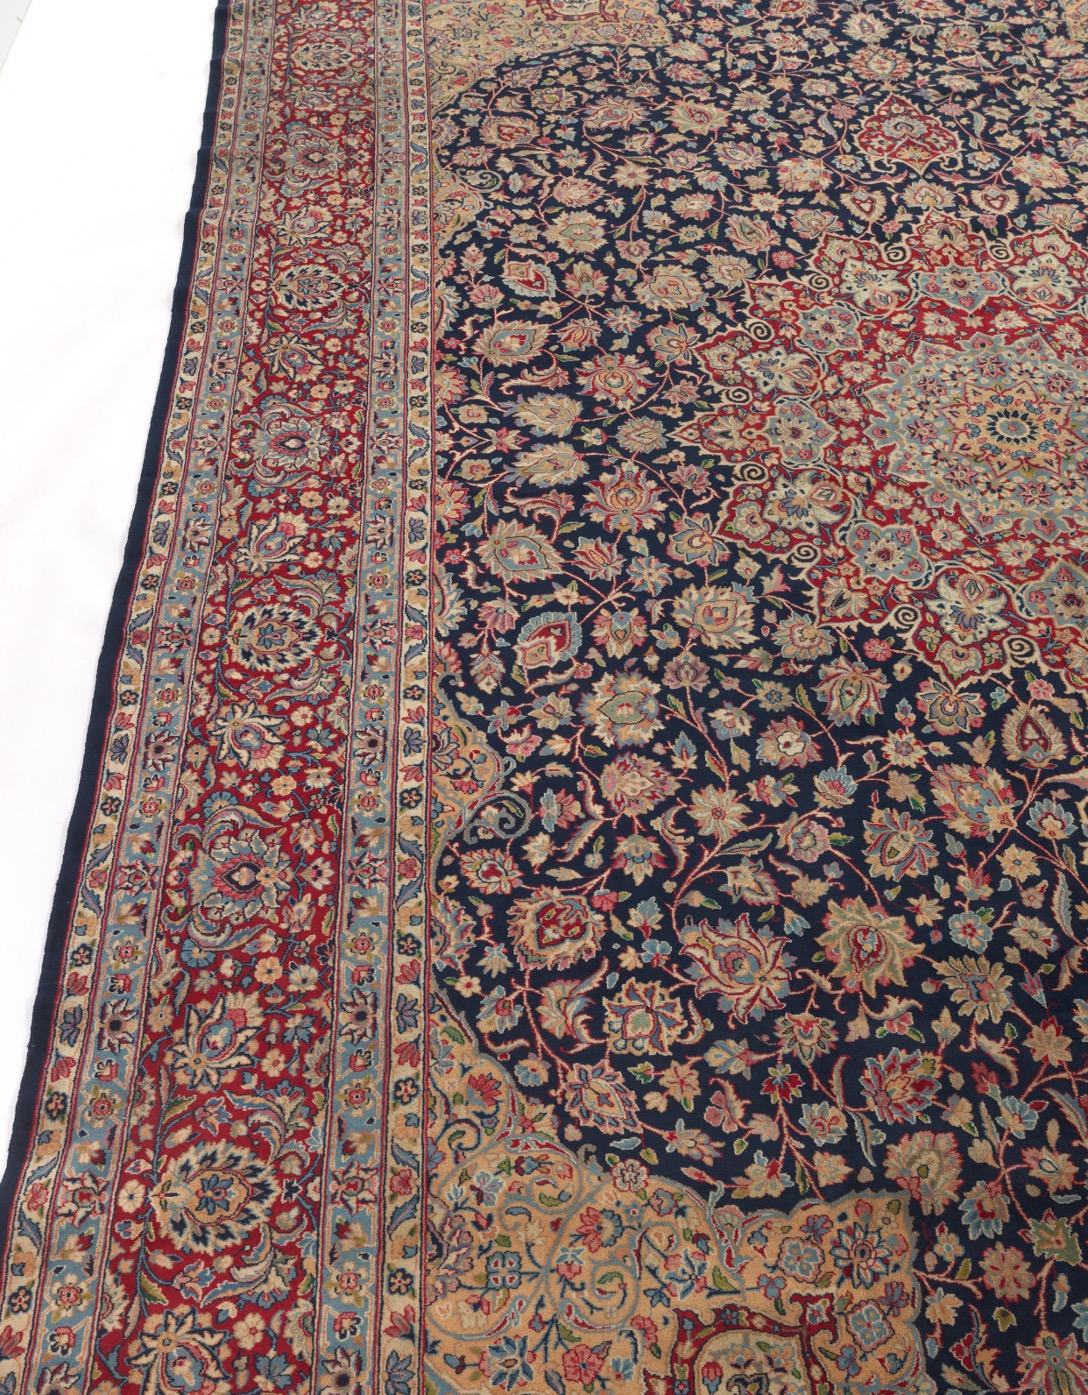 Very Fine Semi Antique Hand Knotted Signed Lavar Kerman Carpet - Image 5 of 8